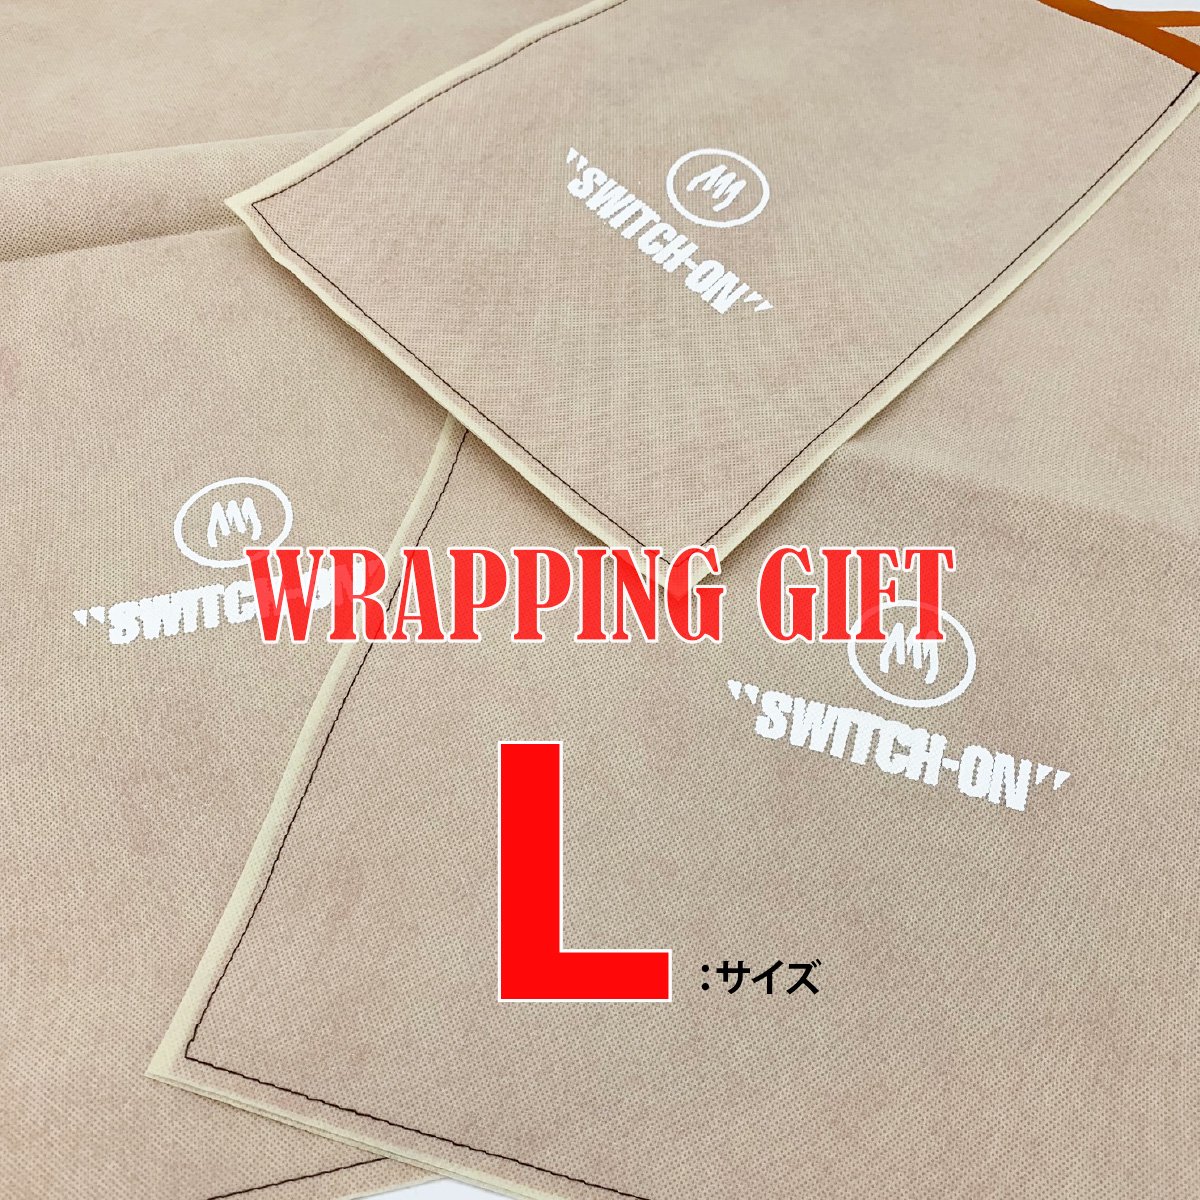 WRAPPING GIFTL